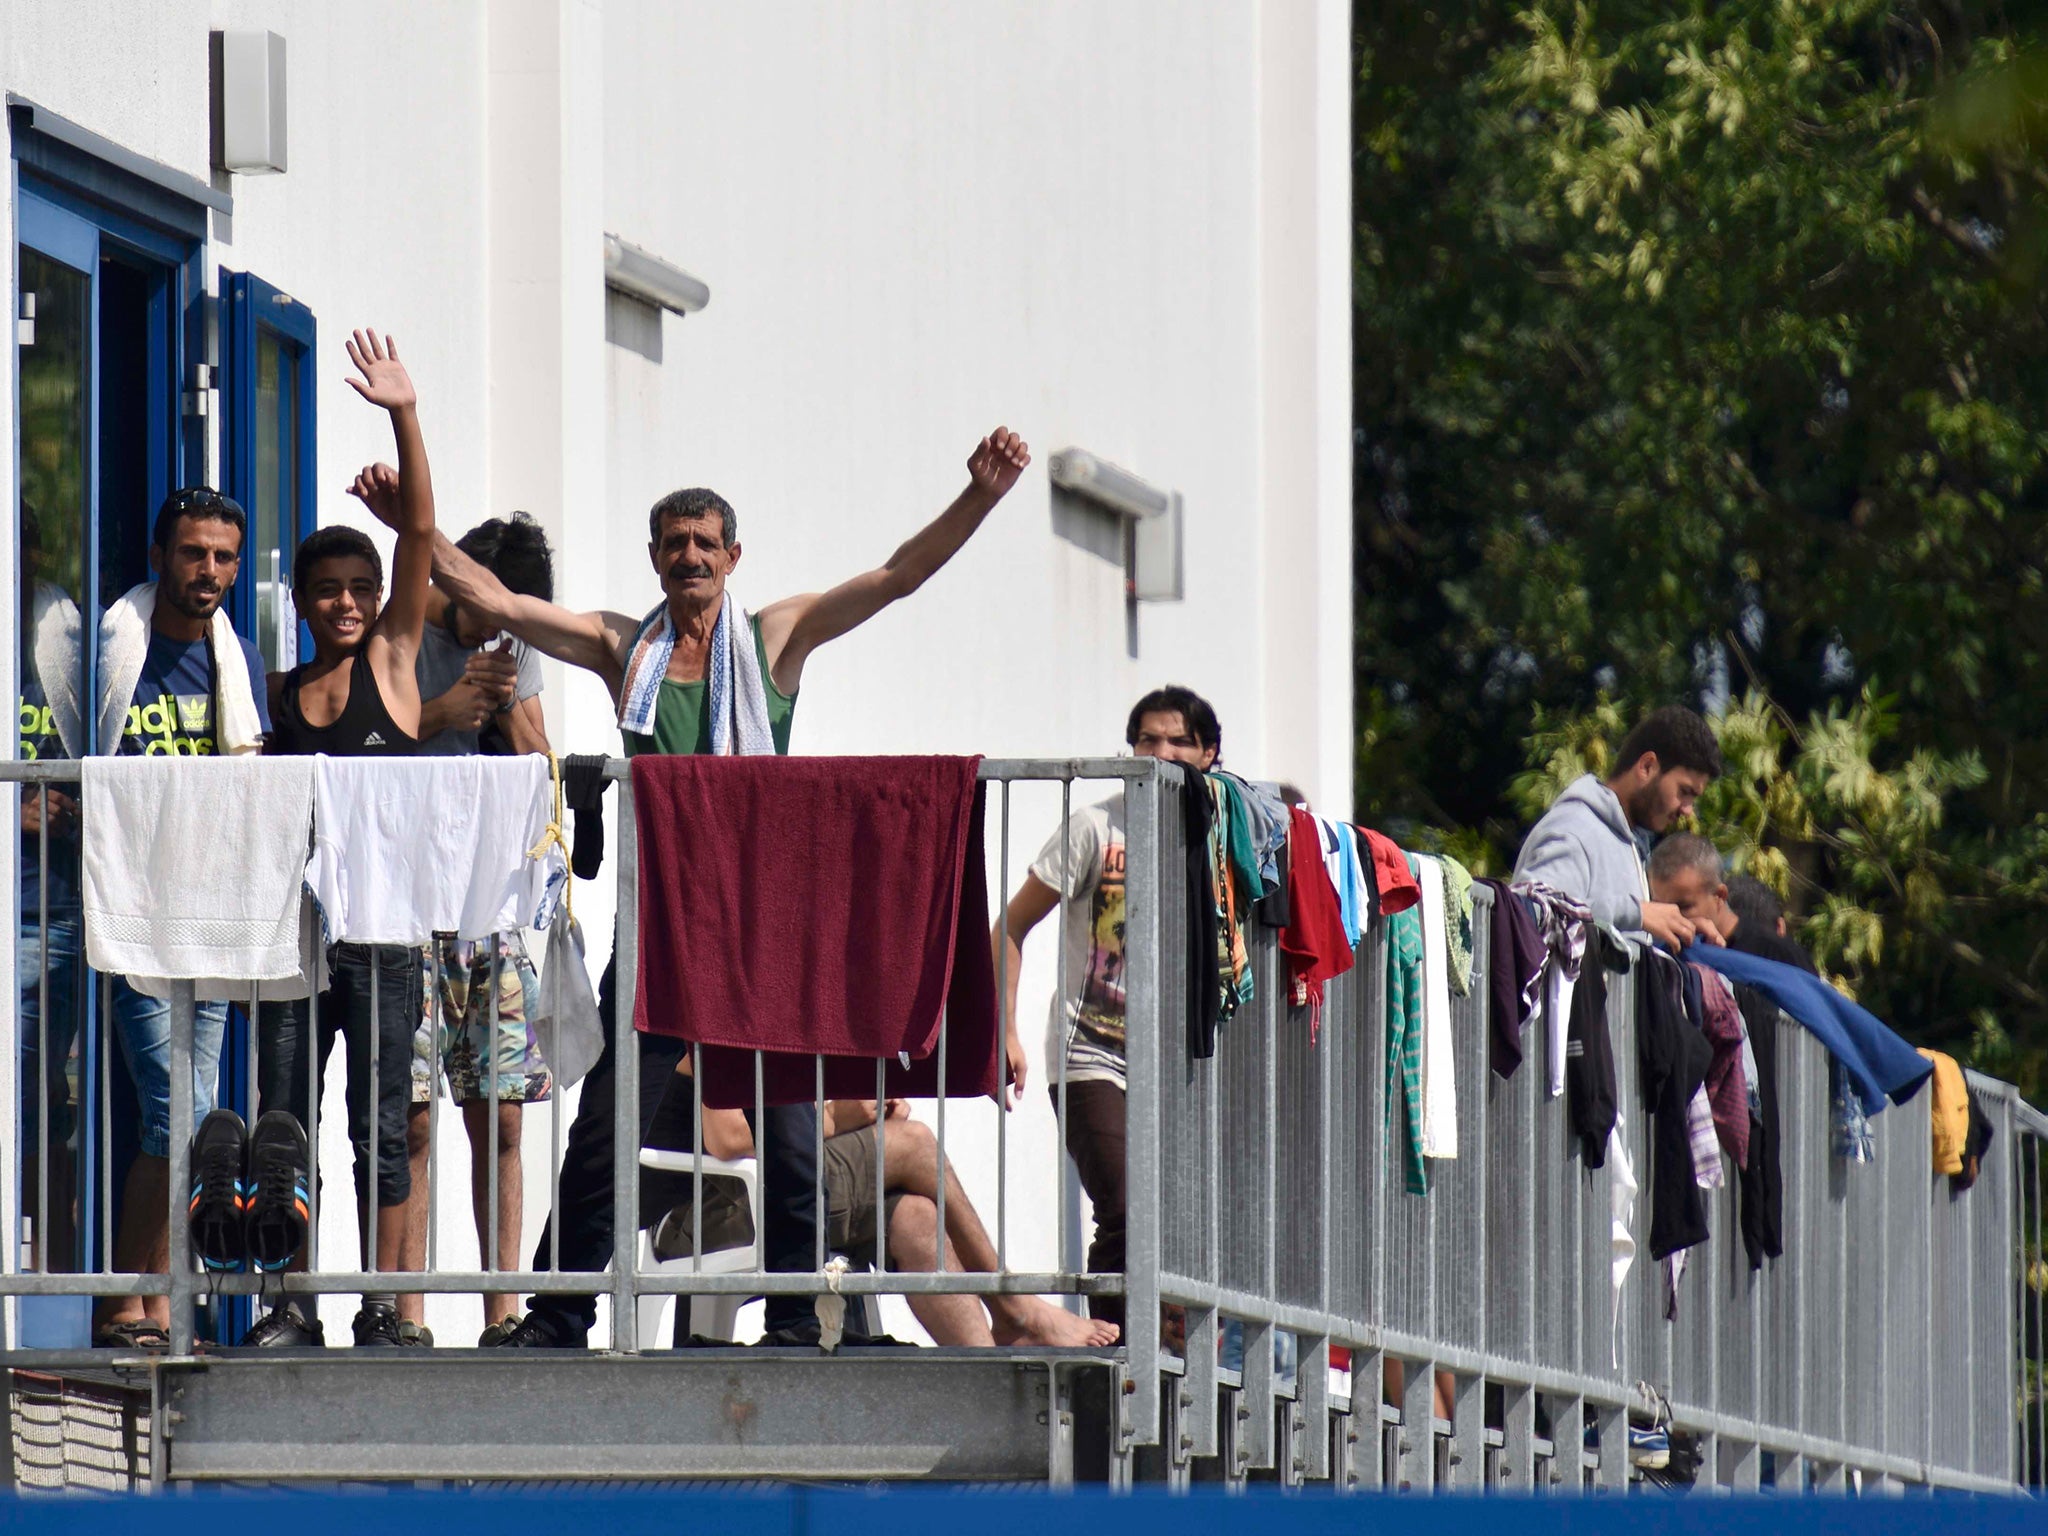 Migrants wave as they stand on the staircase of an asylum seekers accomodation facility in the eastern German town of Heidenau (Reuters)